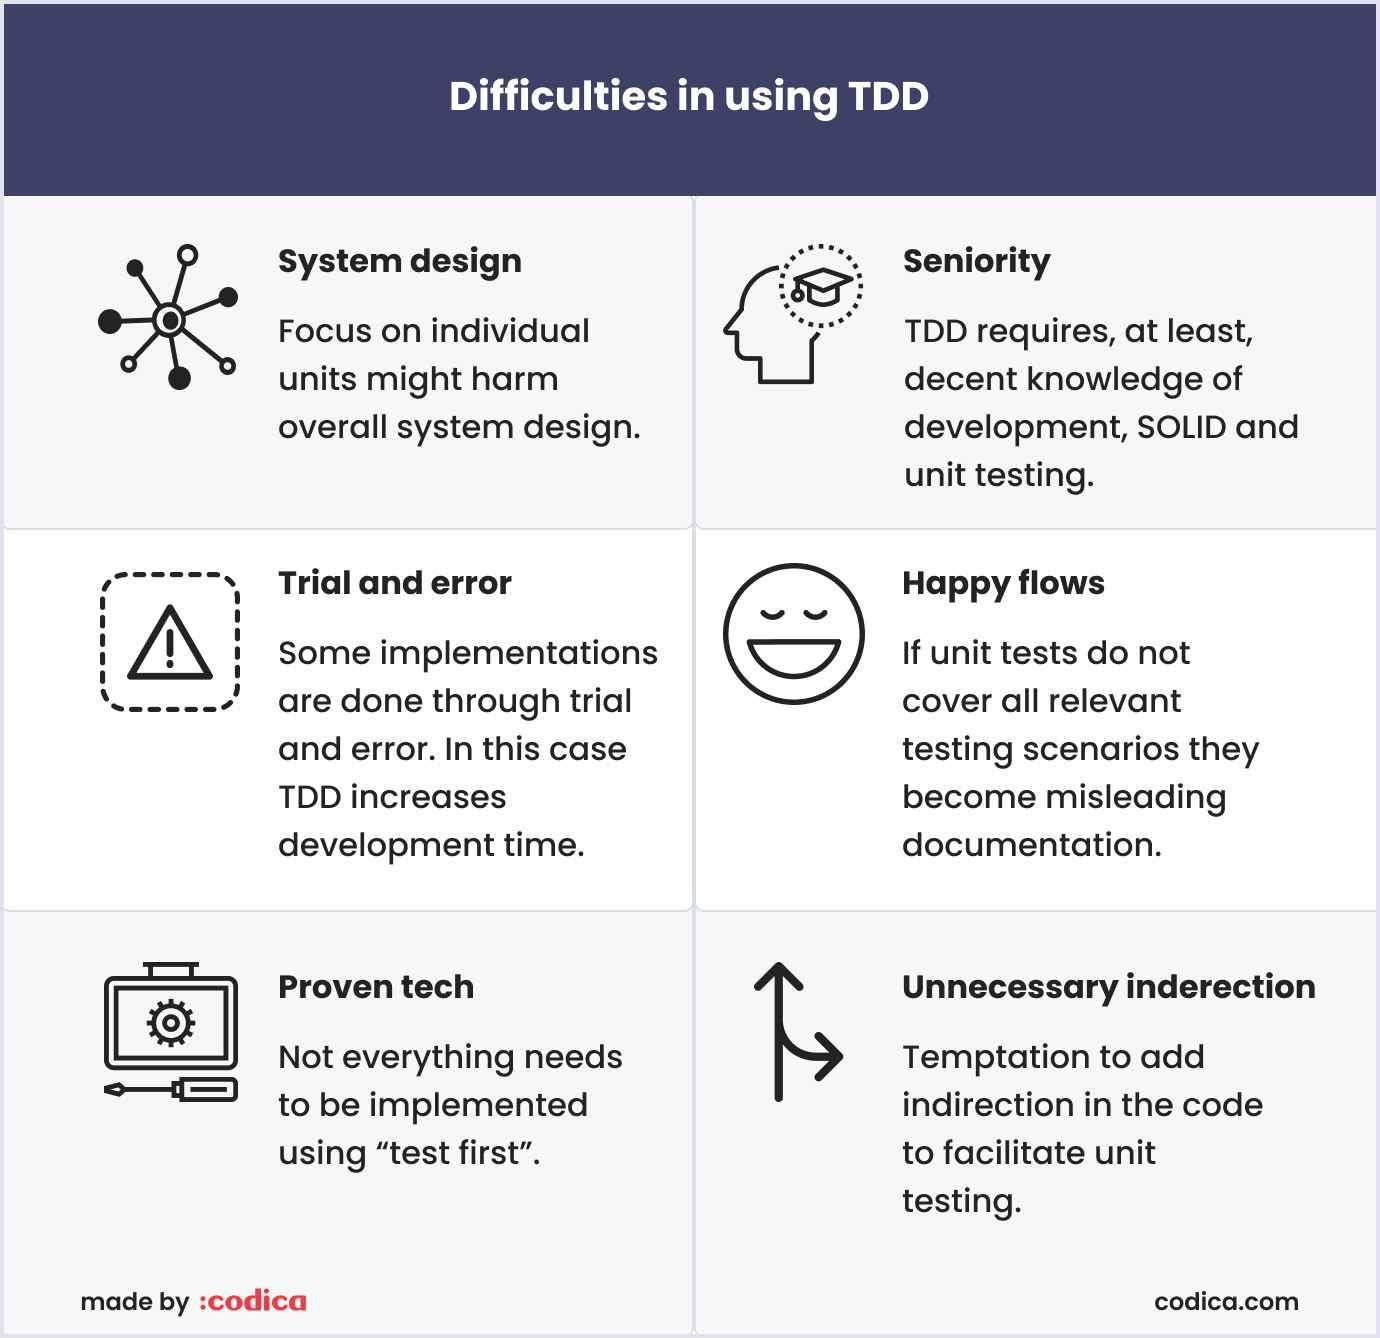 Difficulties in using TDD